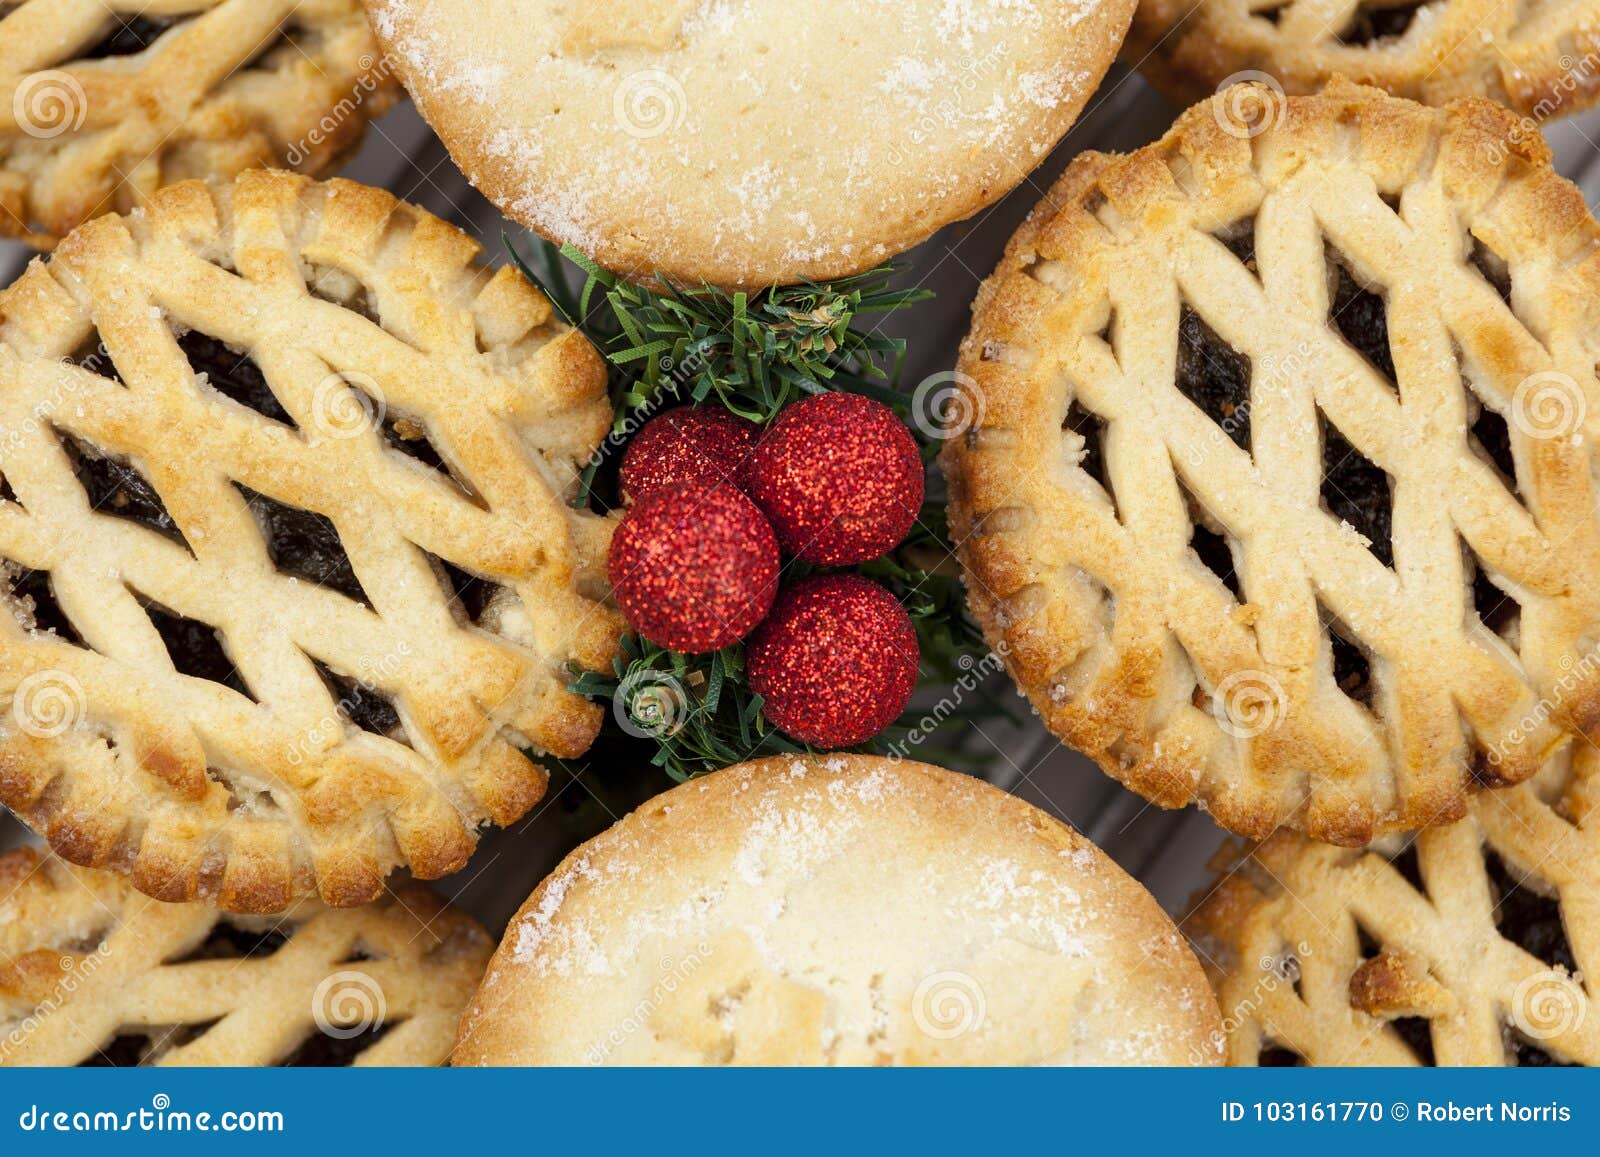 Christmas Decorations in the Middle of a Tray of Mince Pies Stock Photo -  Image of fruit, cake: 103161770